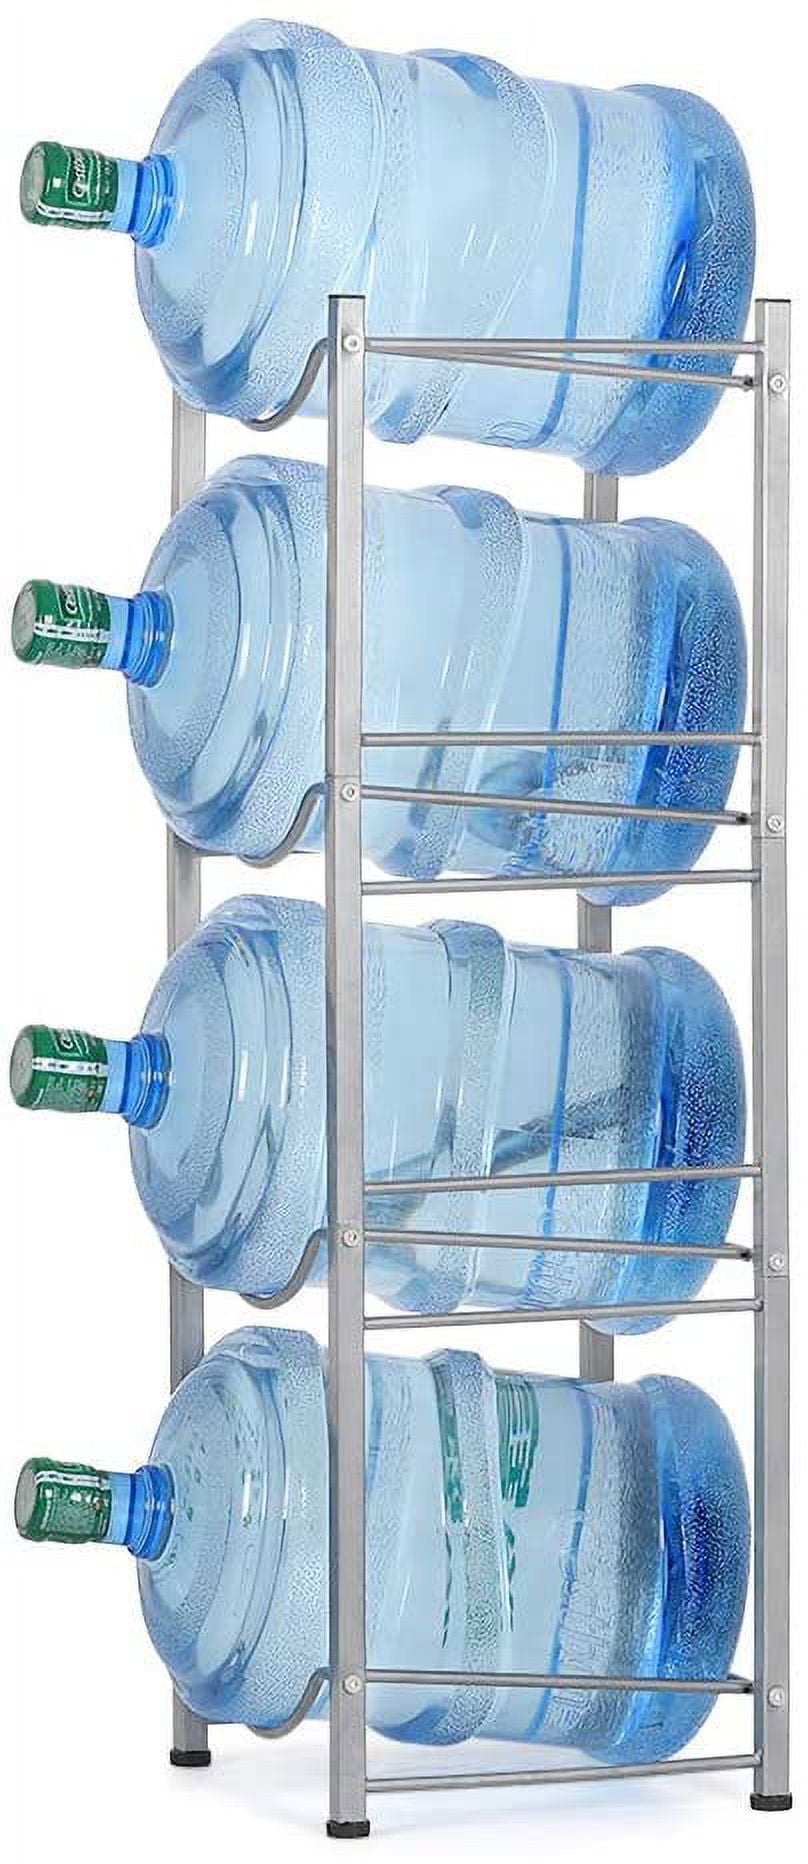 Water Bottle Stand 8 Levels (5 Gallons) – Blue Star Pure Water